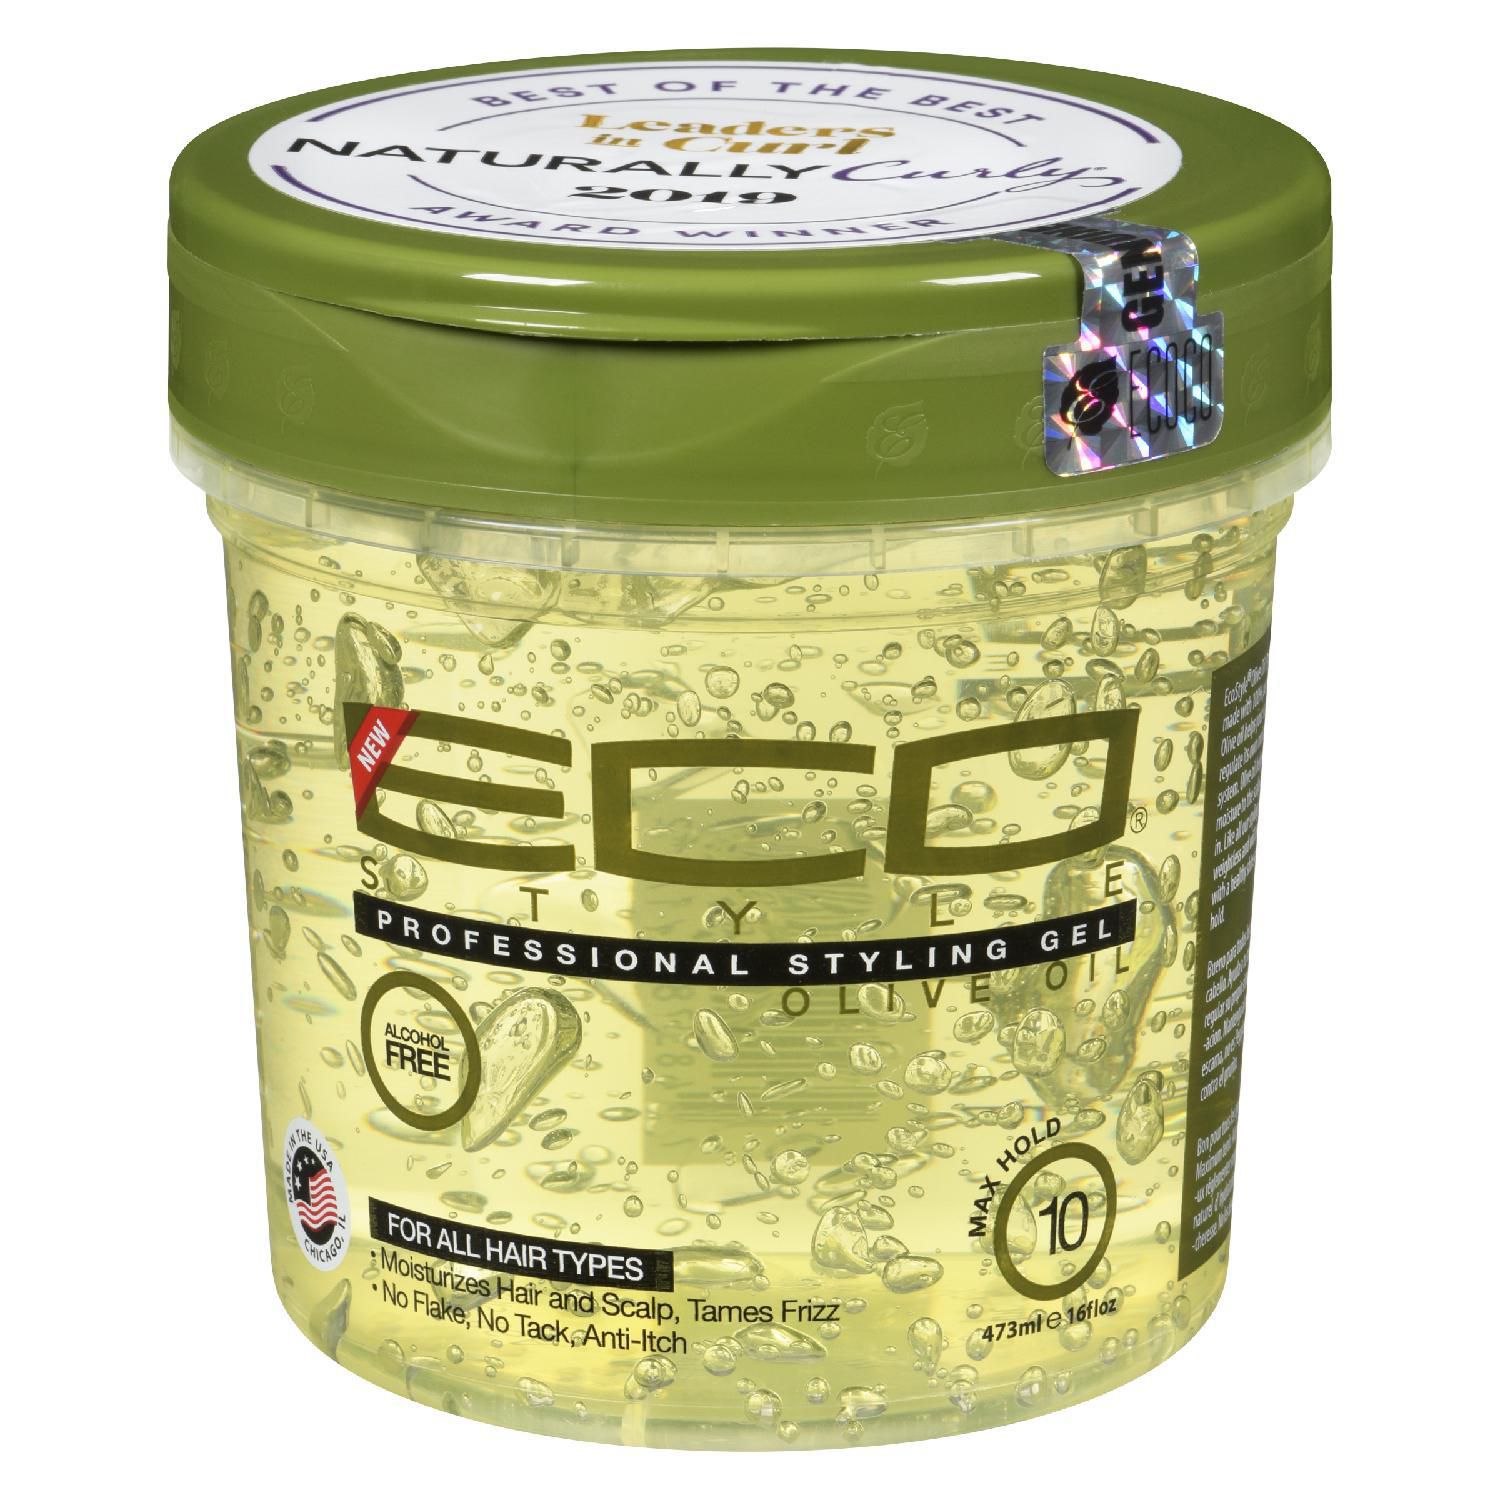  Nvey Eco Styling Gel, Sport, Clean Scent, 16 Fl Oz : Hair  Styling Gels : Beauty & Personal Care